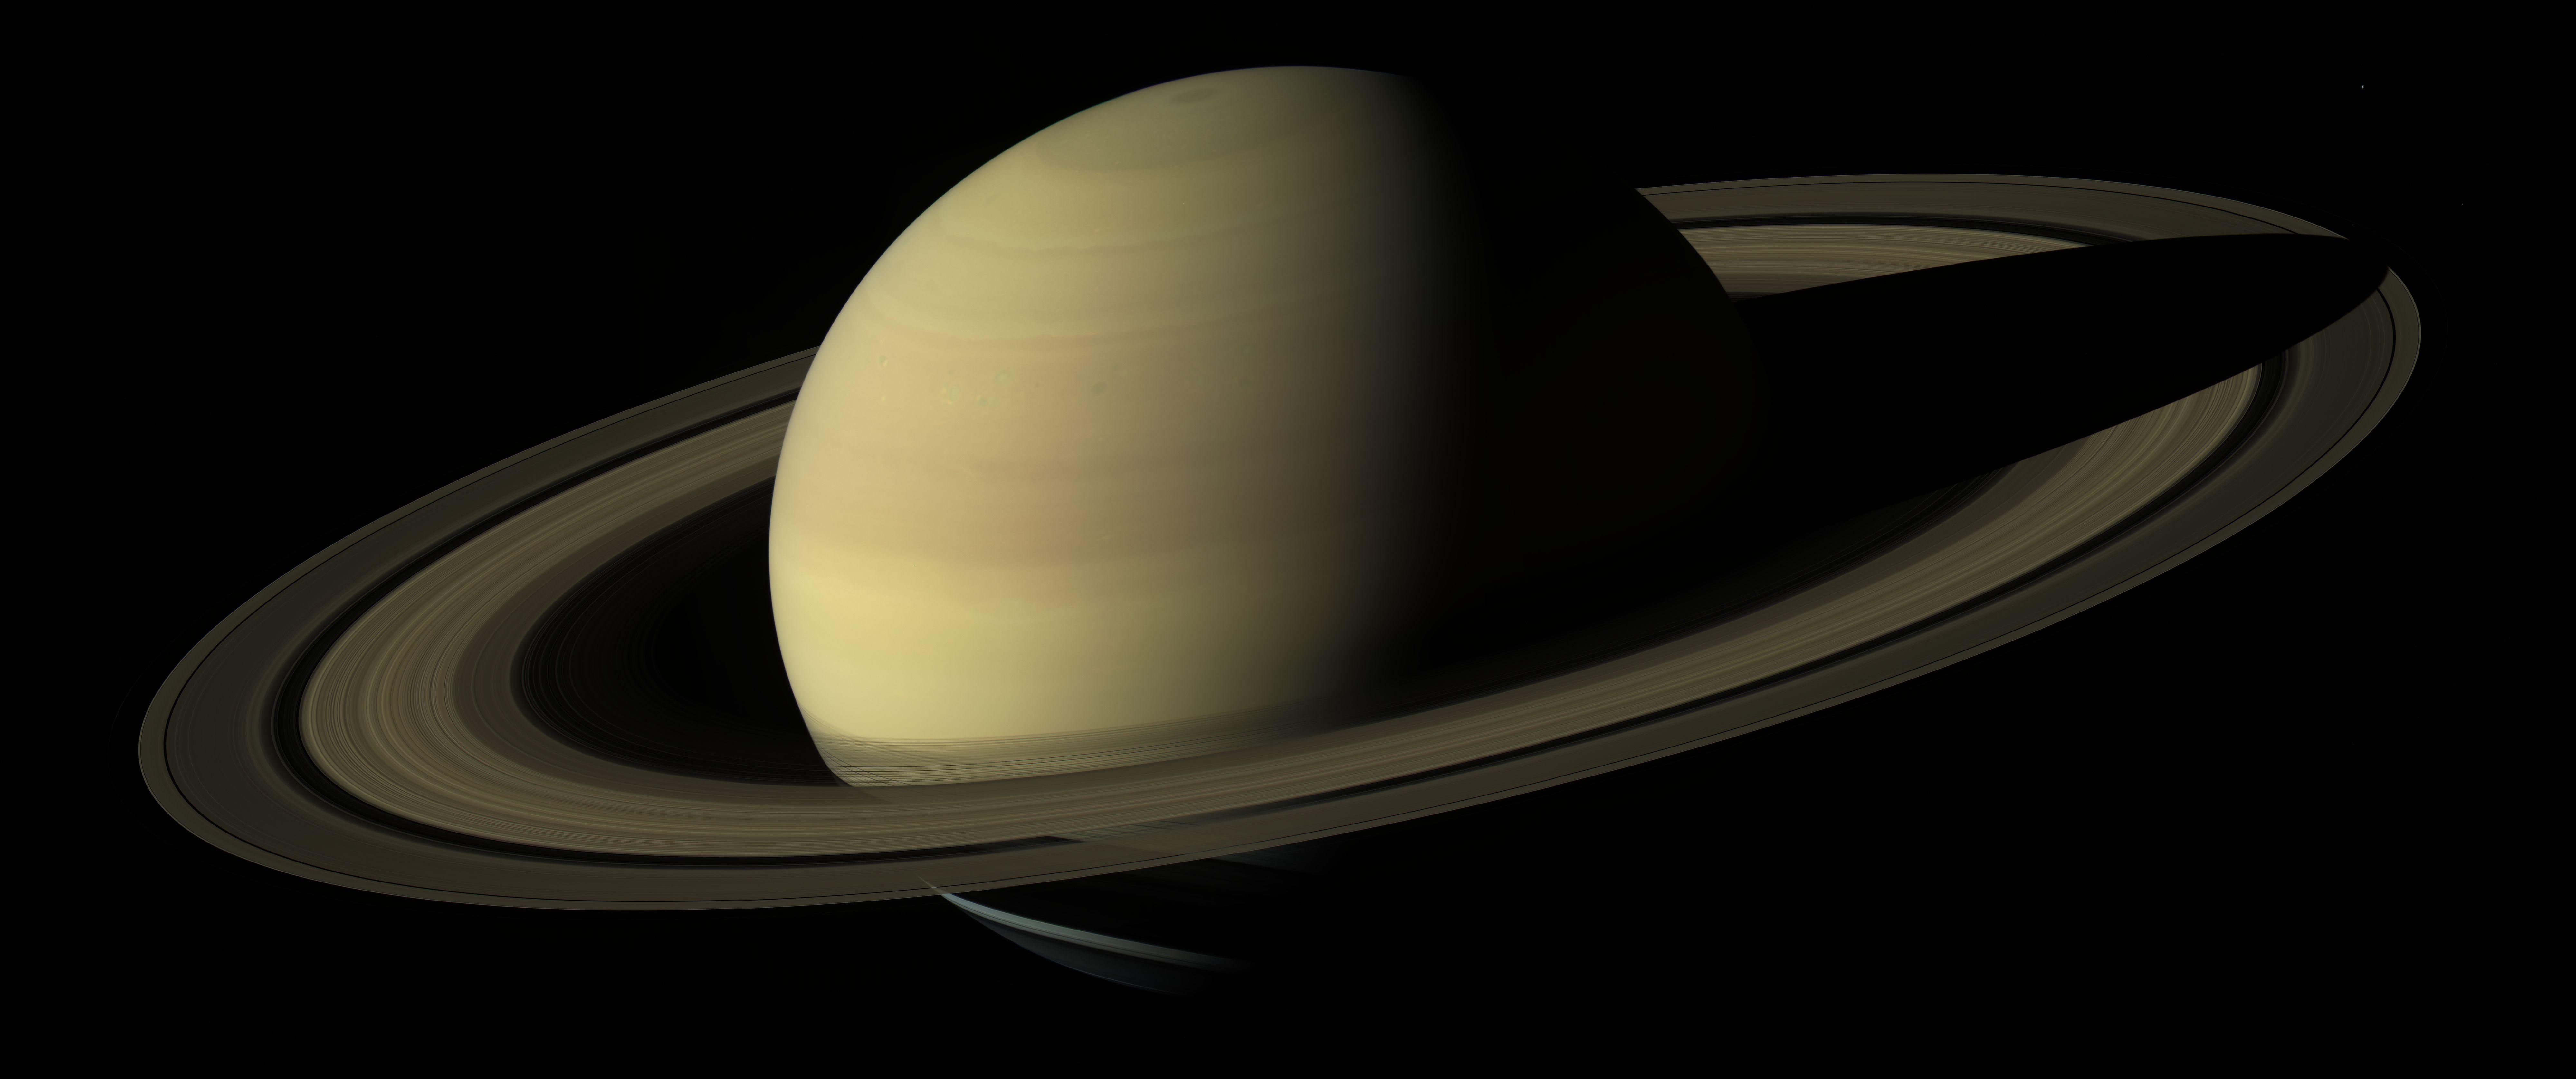 Hd Picture Of Saturn